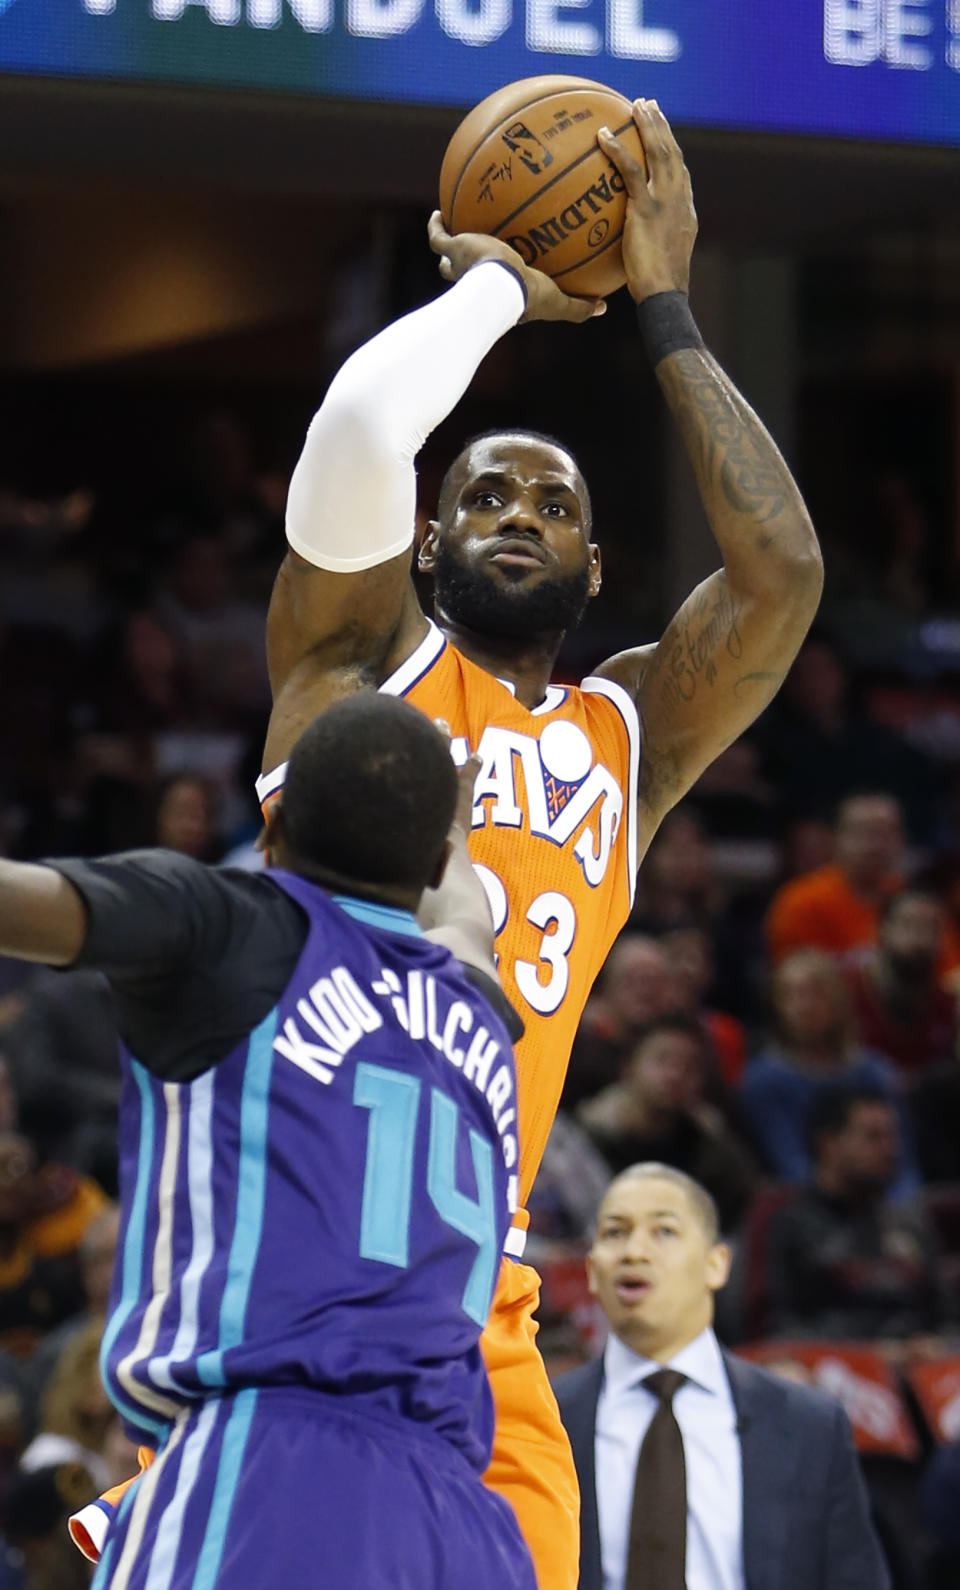 Cleveland Cavaliers' LeBron James (23) shoots over Charlotte Hornets' Michael Kidd-Gilchrist during the first half of an NBA basketball game Saturday, Dec 10, 2016, in Cleveland. (AP Photo/Ron Schwane)